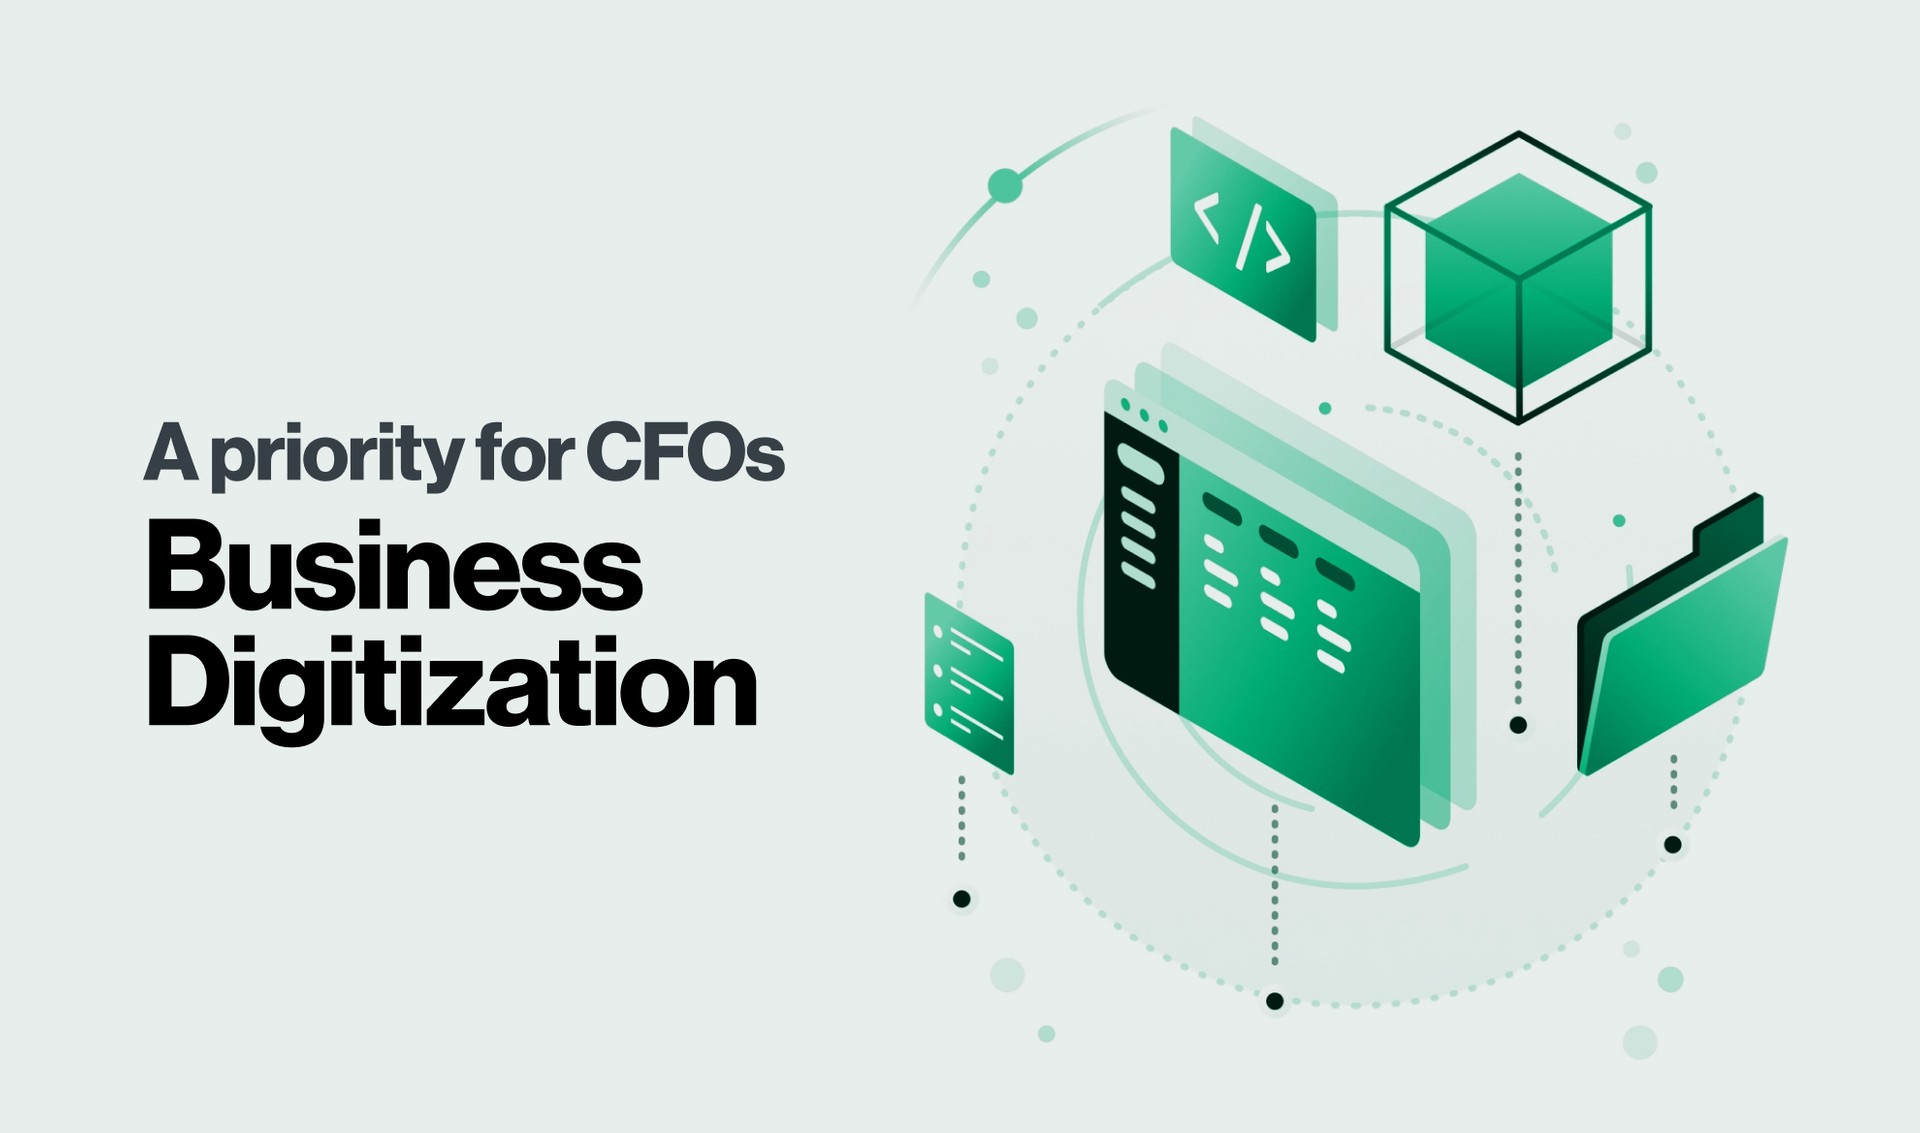 Business Digitization Is A Priority To CFOs